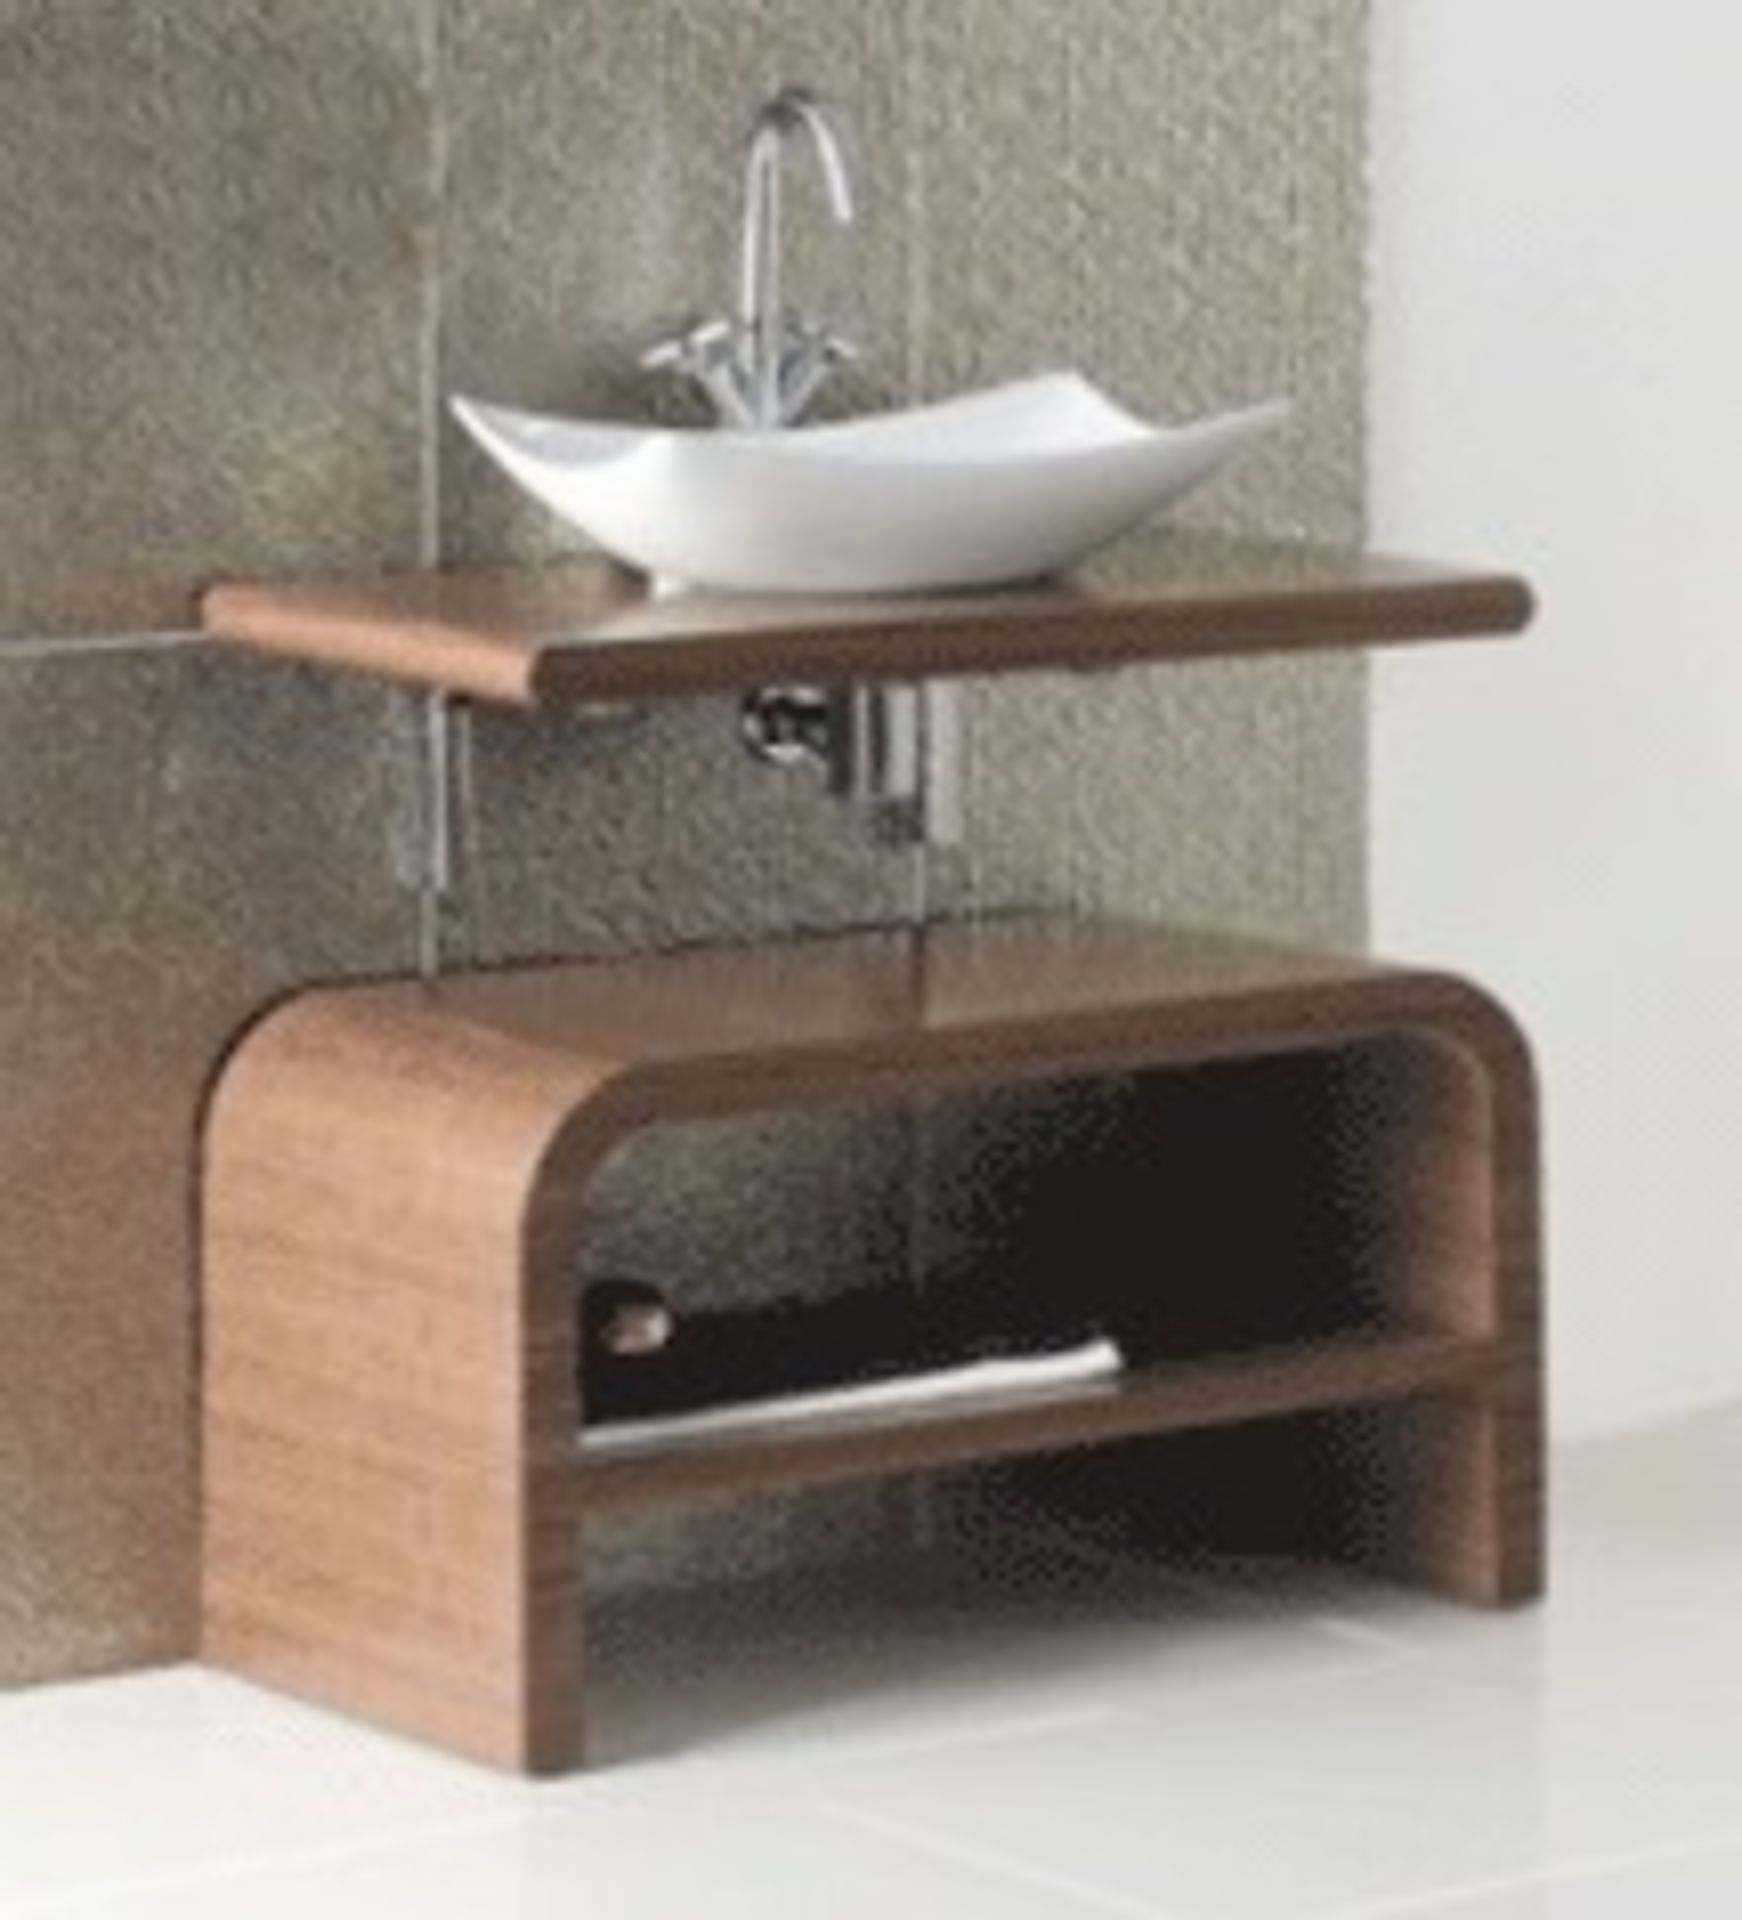 1 x Vogue ARC Bathroom Vanity Unit - WALNUT - Series 1 Type D 900mm - Manufactured to the Highest - Image 2 of 2